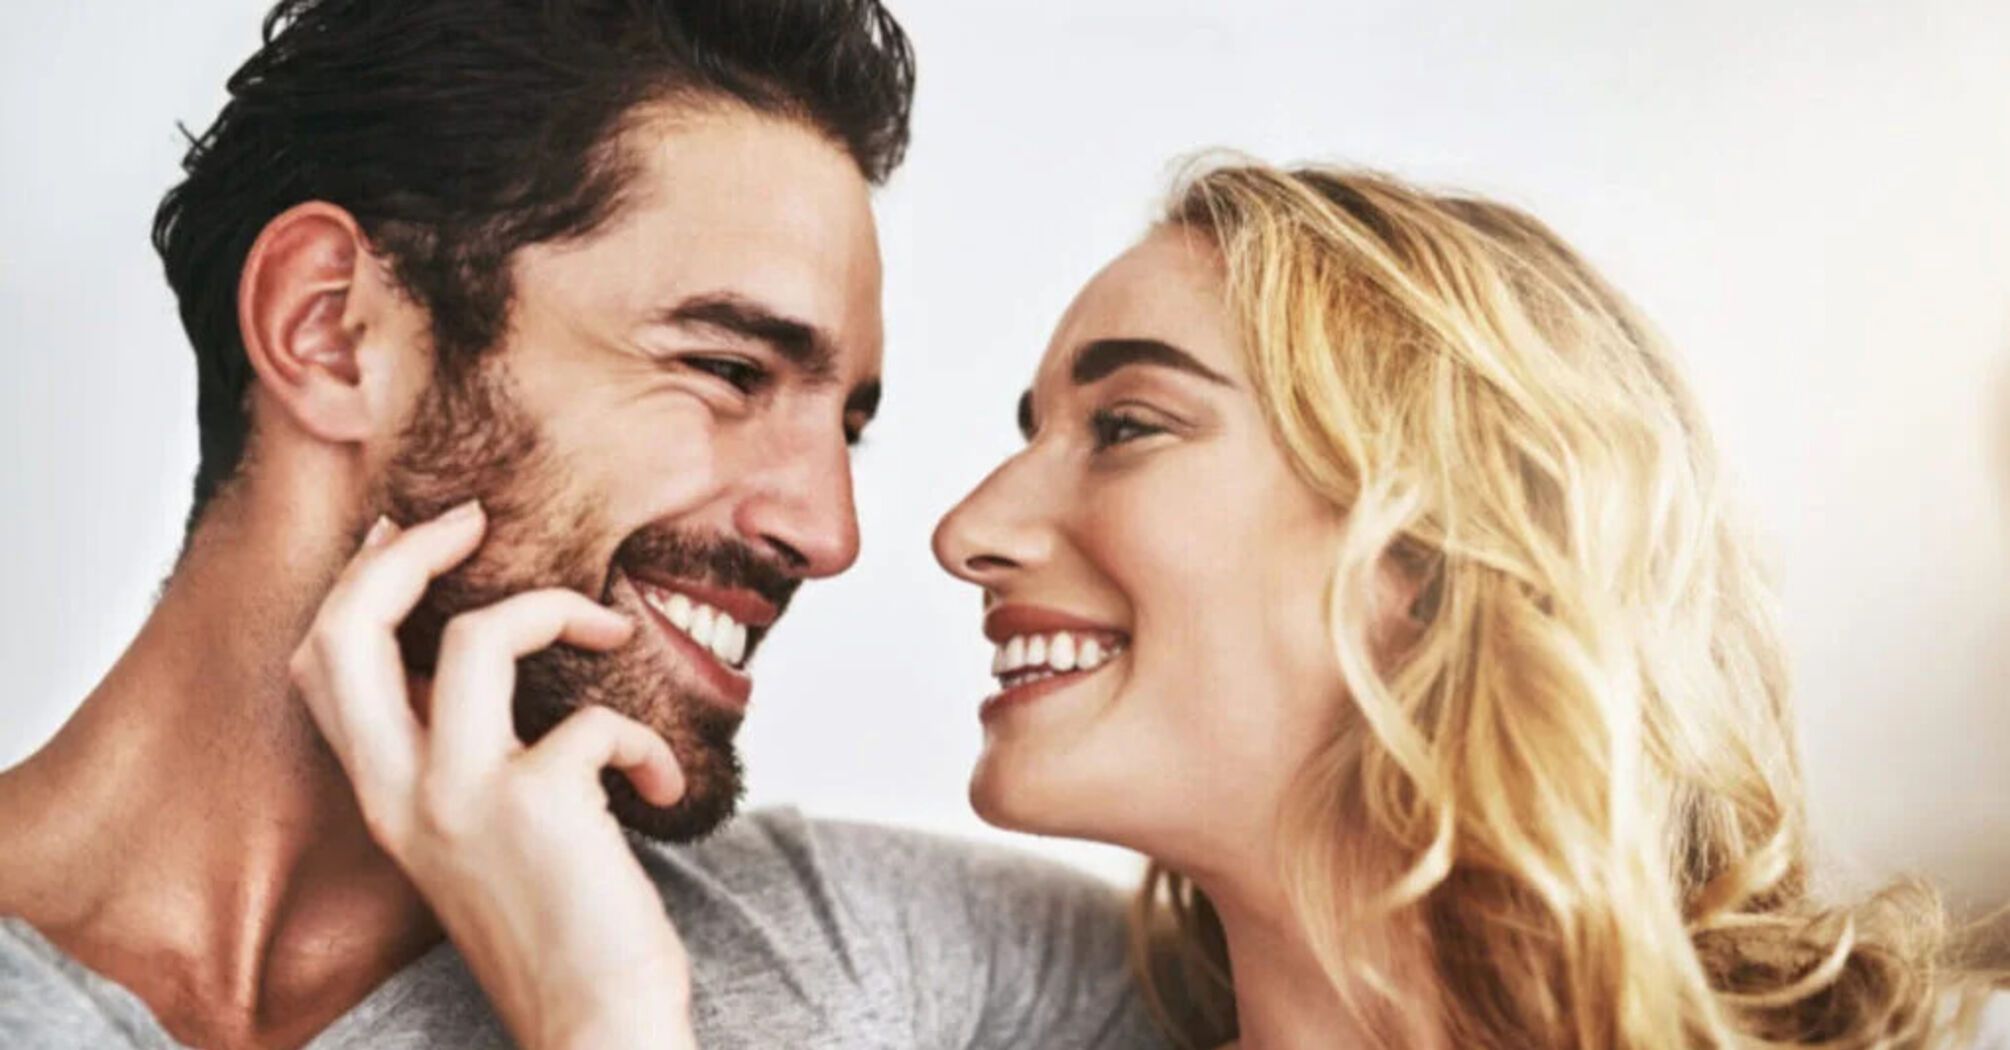 8 unique qualities that make women emotionally attractive to men